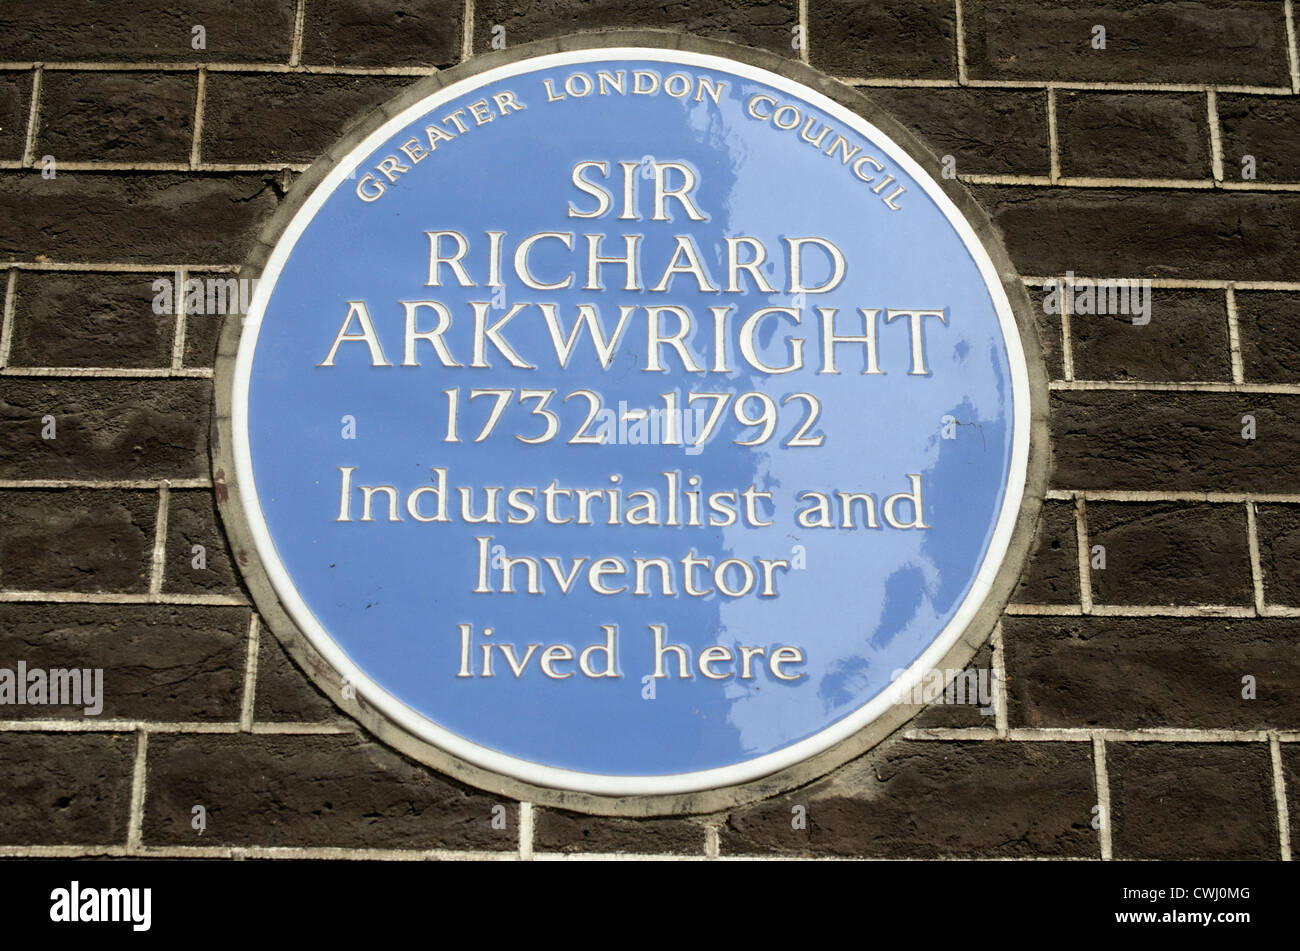 A blue plaque marking the former home of the industialist and inventor Sir Richard Arkwright, Adam St, London, UK Stock Photo